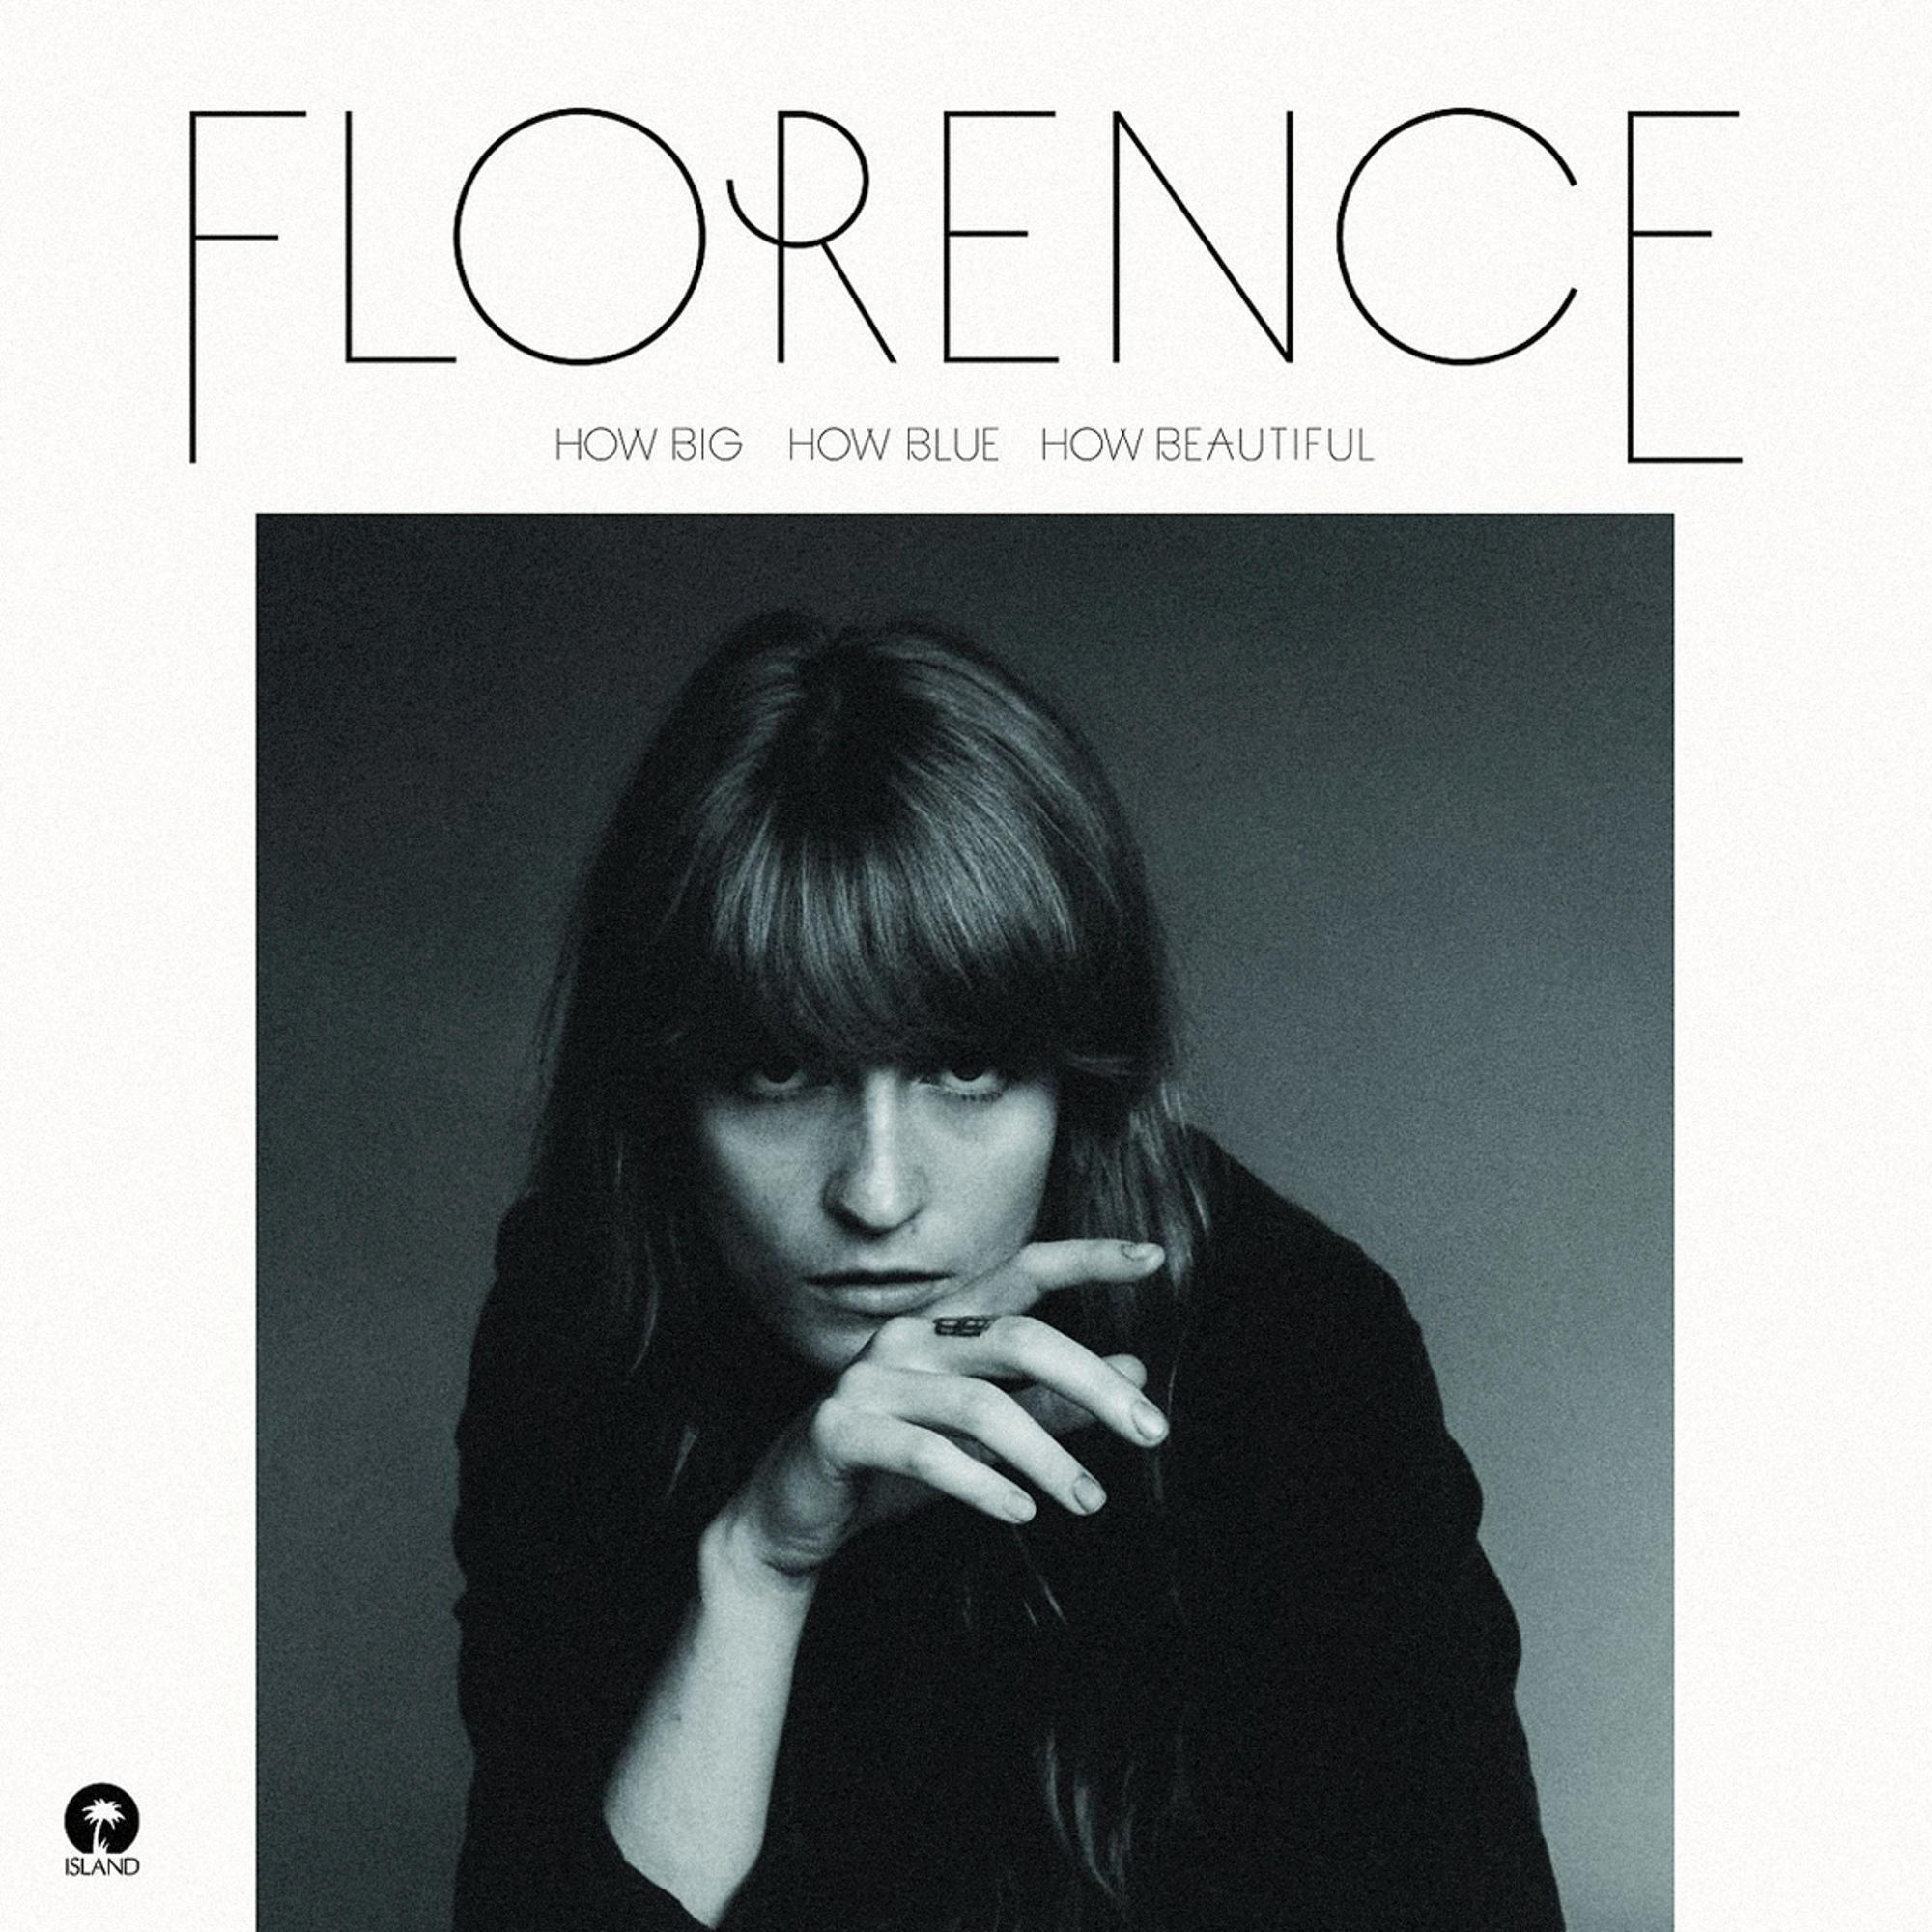 Big, Florence + - - How Machine Beautiful How (2lp) The How Blue, (Vinyl)